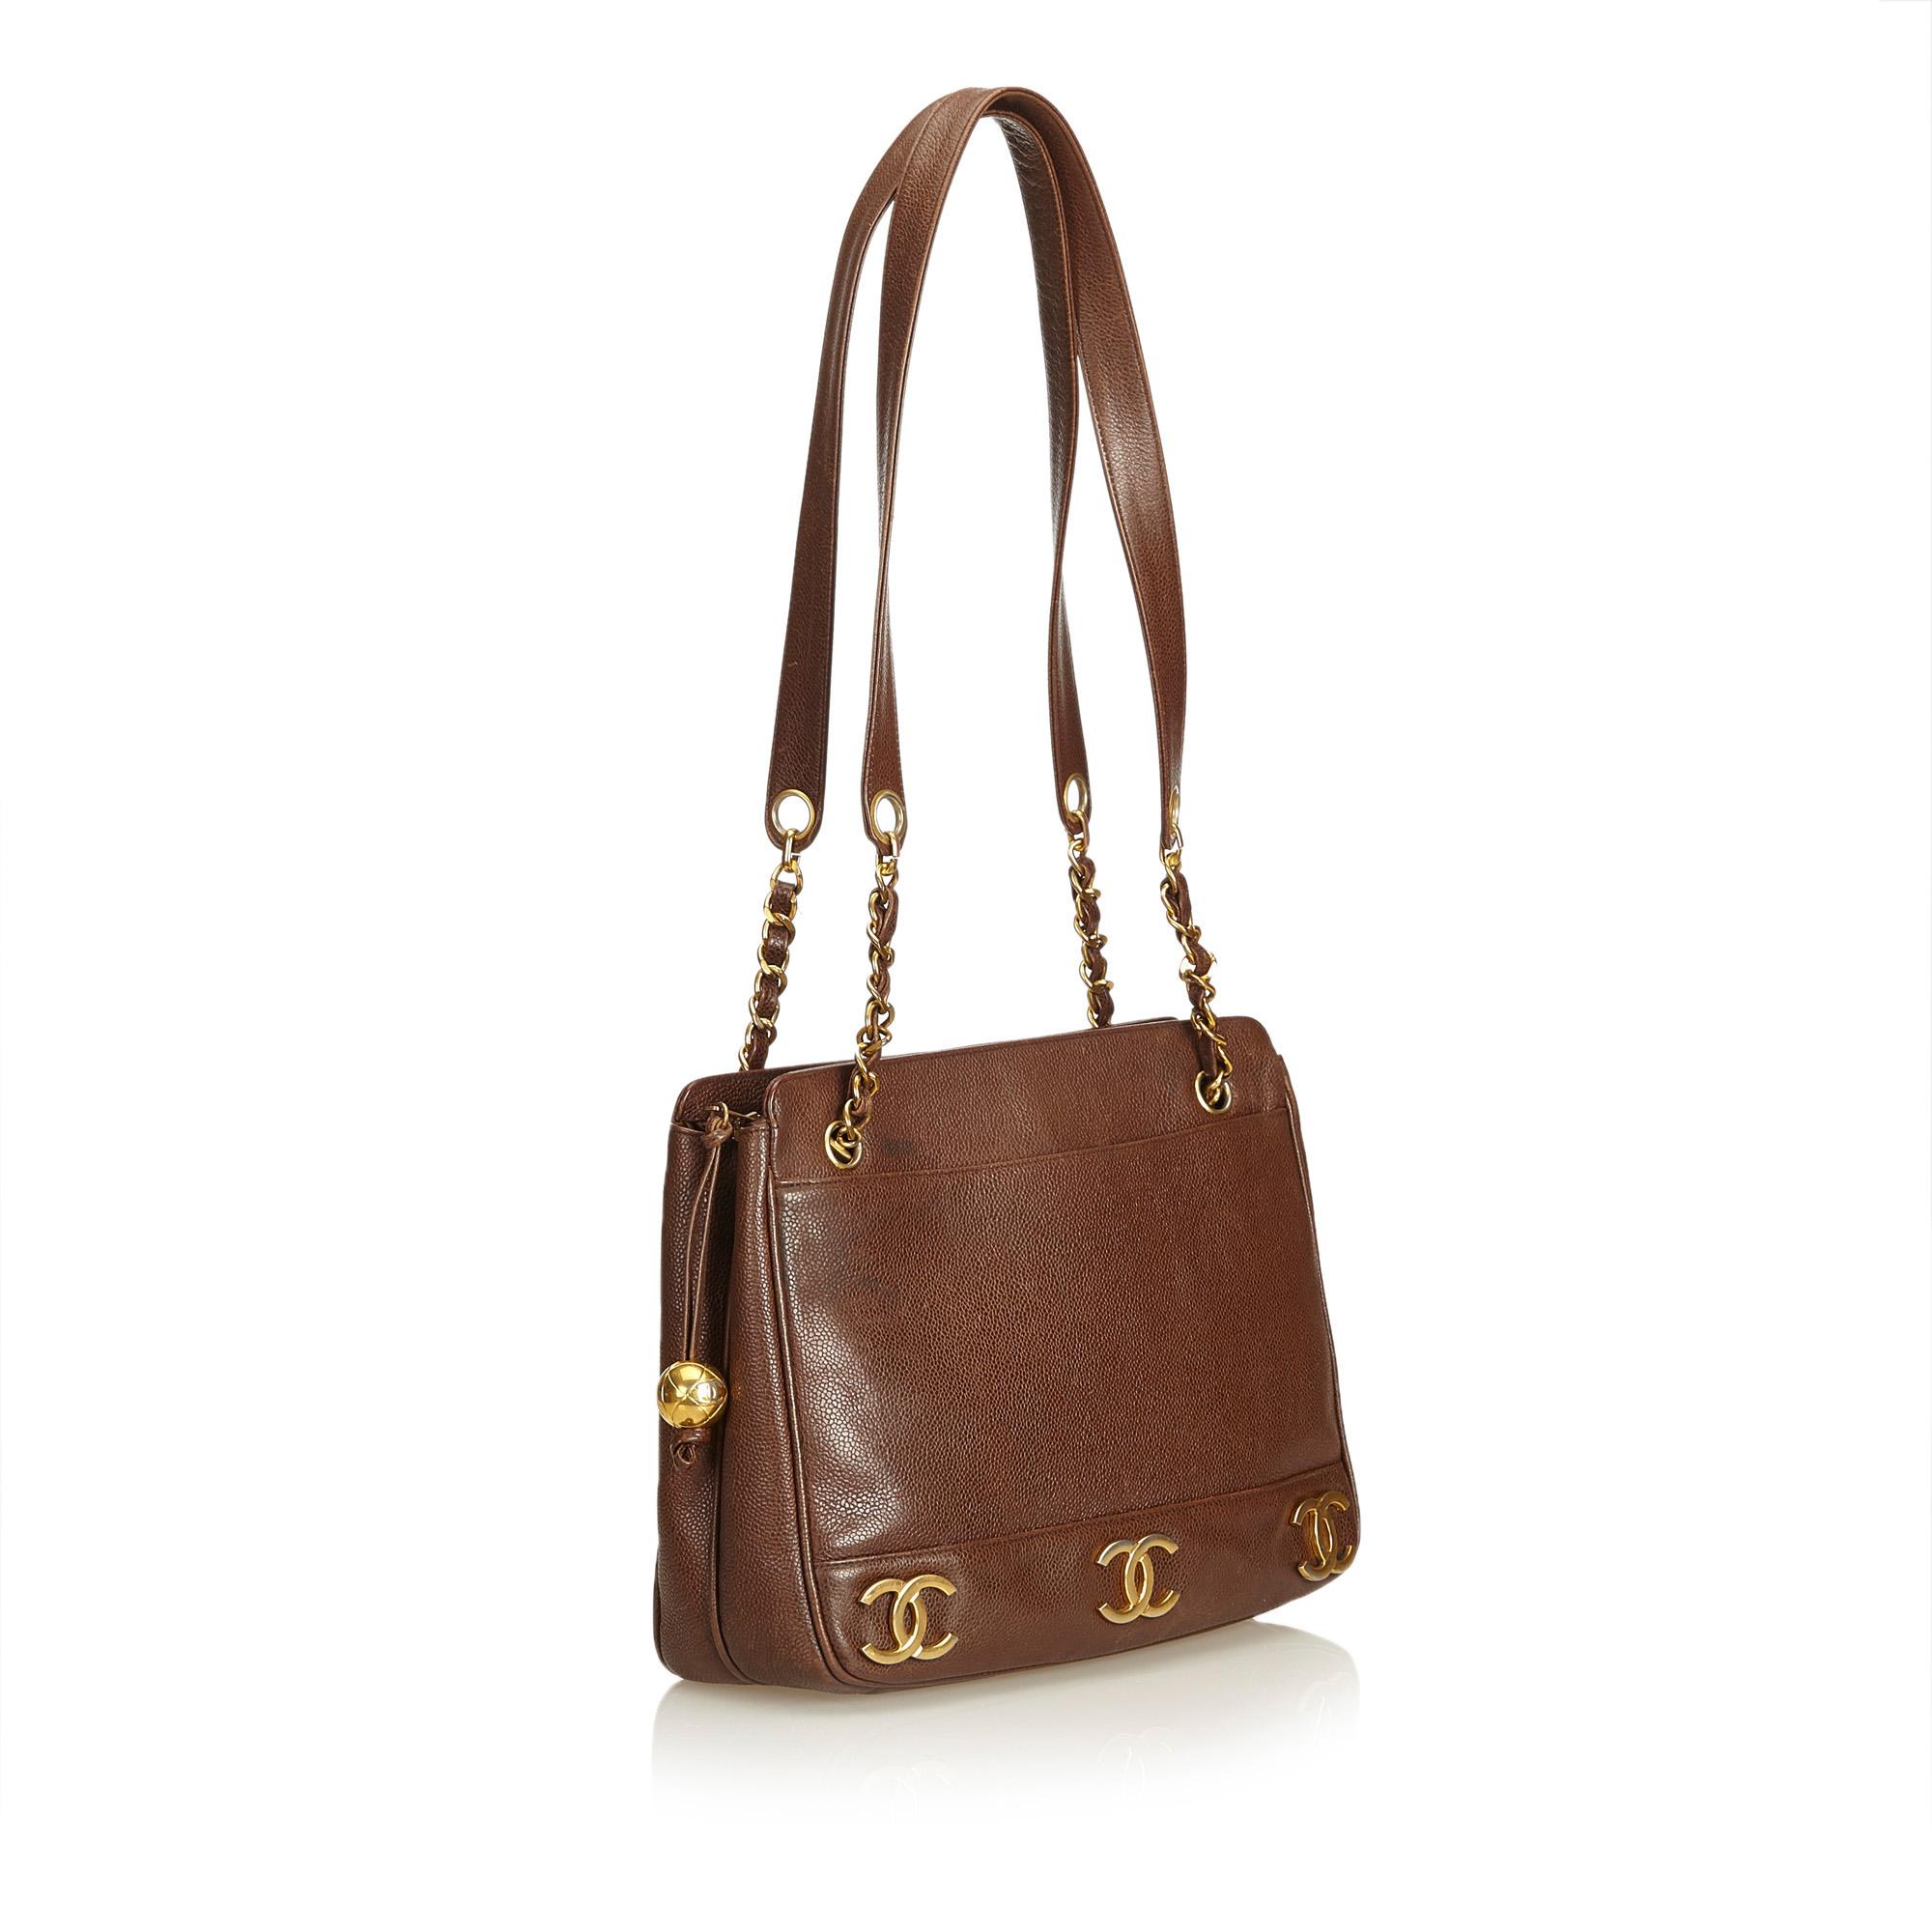 This shoulder bag features a leather body, flat leather straps with gold toned chain, top zip closure, and interior zip pocket.

It carries a B condition rating.

Dimensions: 
Length 26.00 cm
Width 31.00 cm
Depth 9.00 cm
Shoulder Drop 37.00